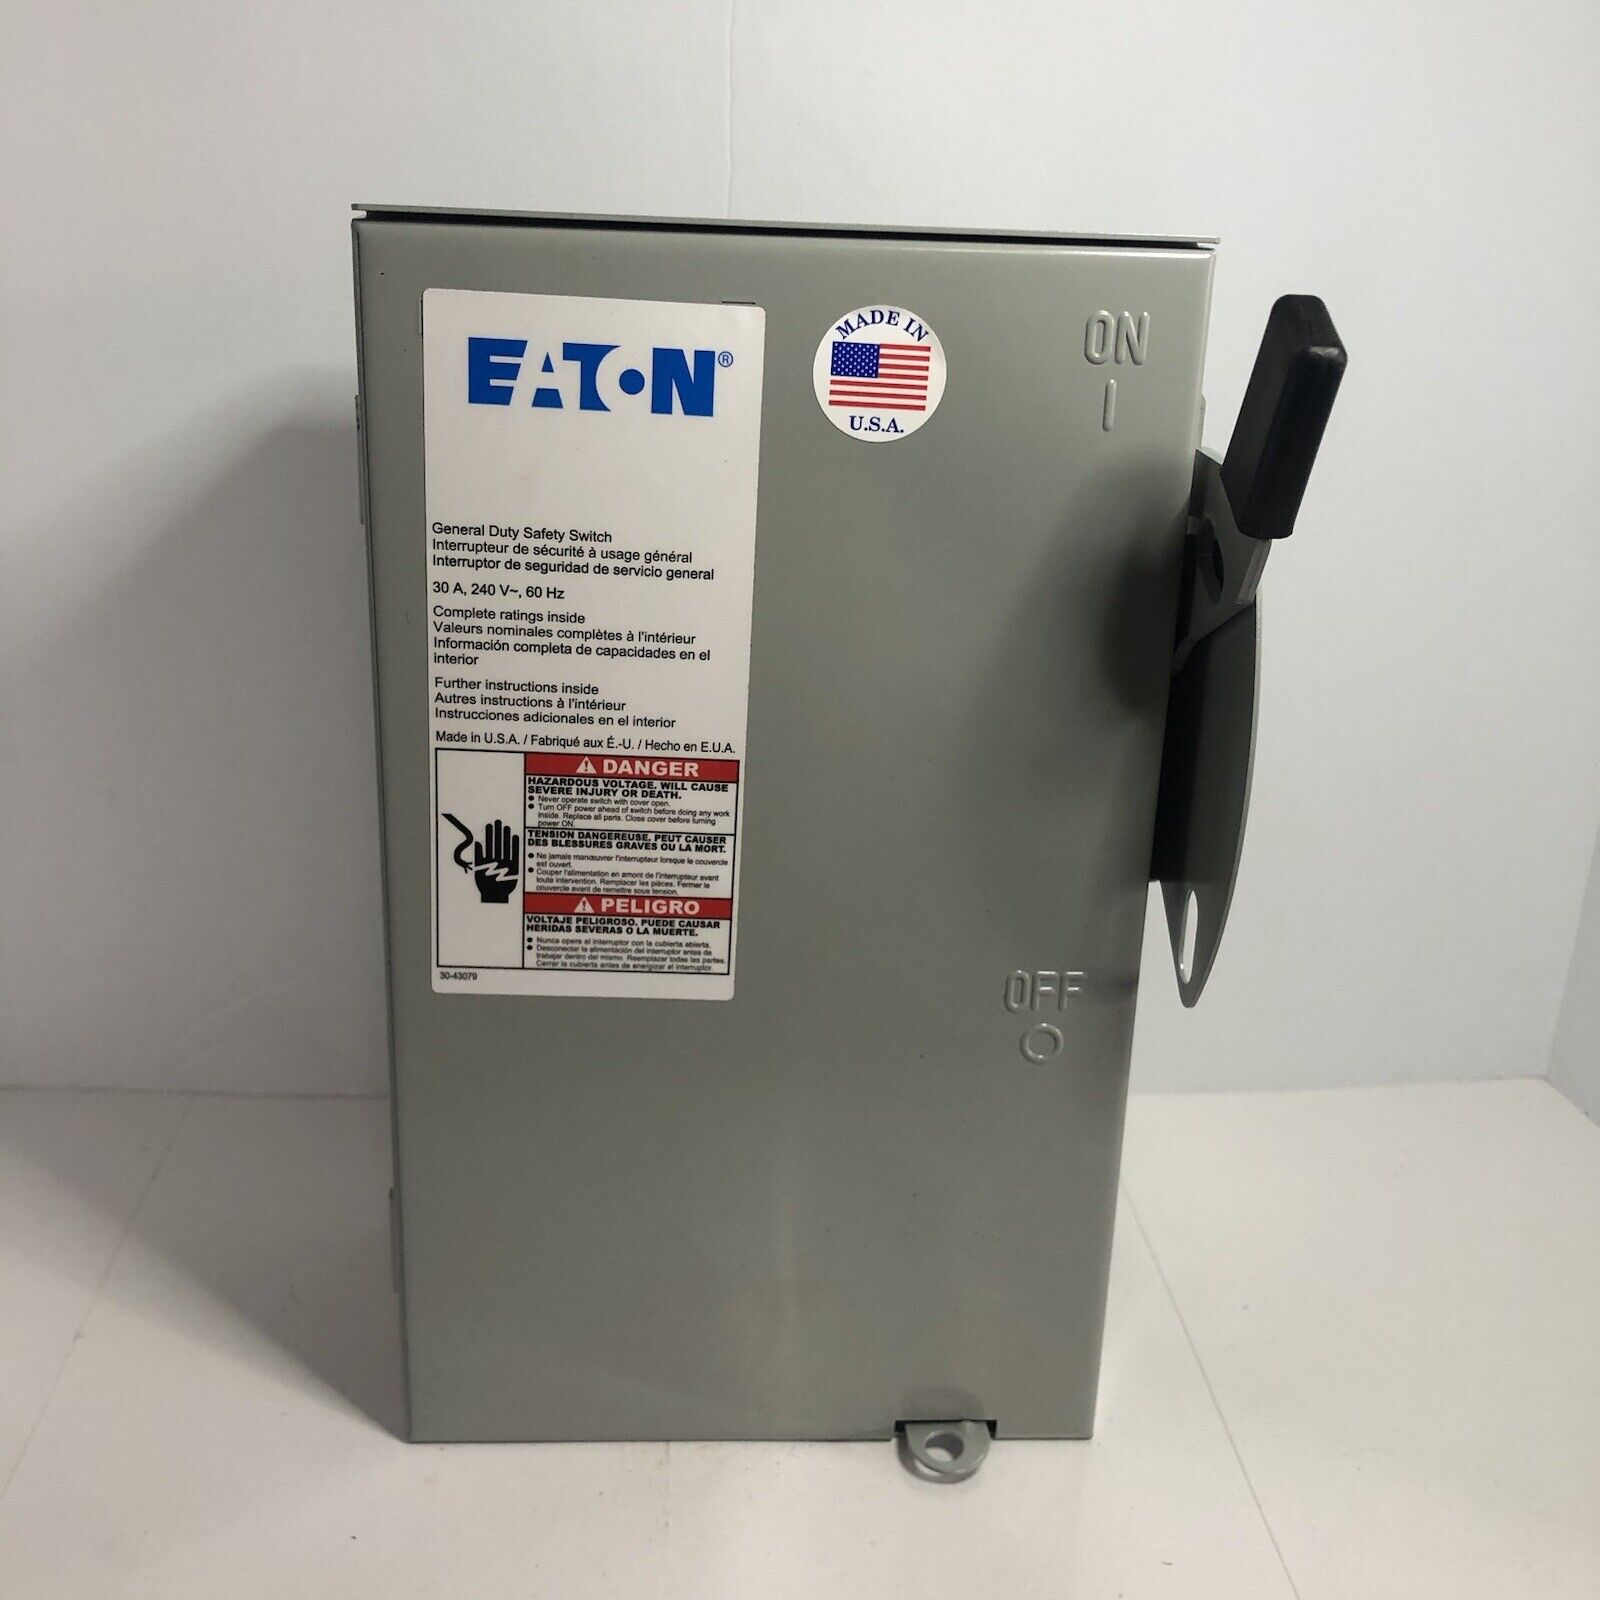 Eaton General Duty Safety Switch 30 A 240 V- 60 Hz DG221URB. Open Box